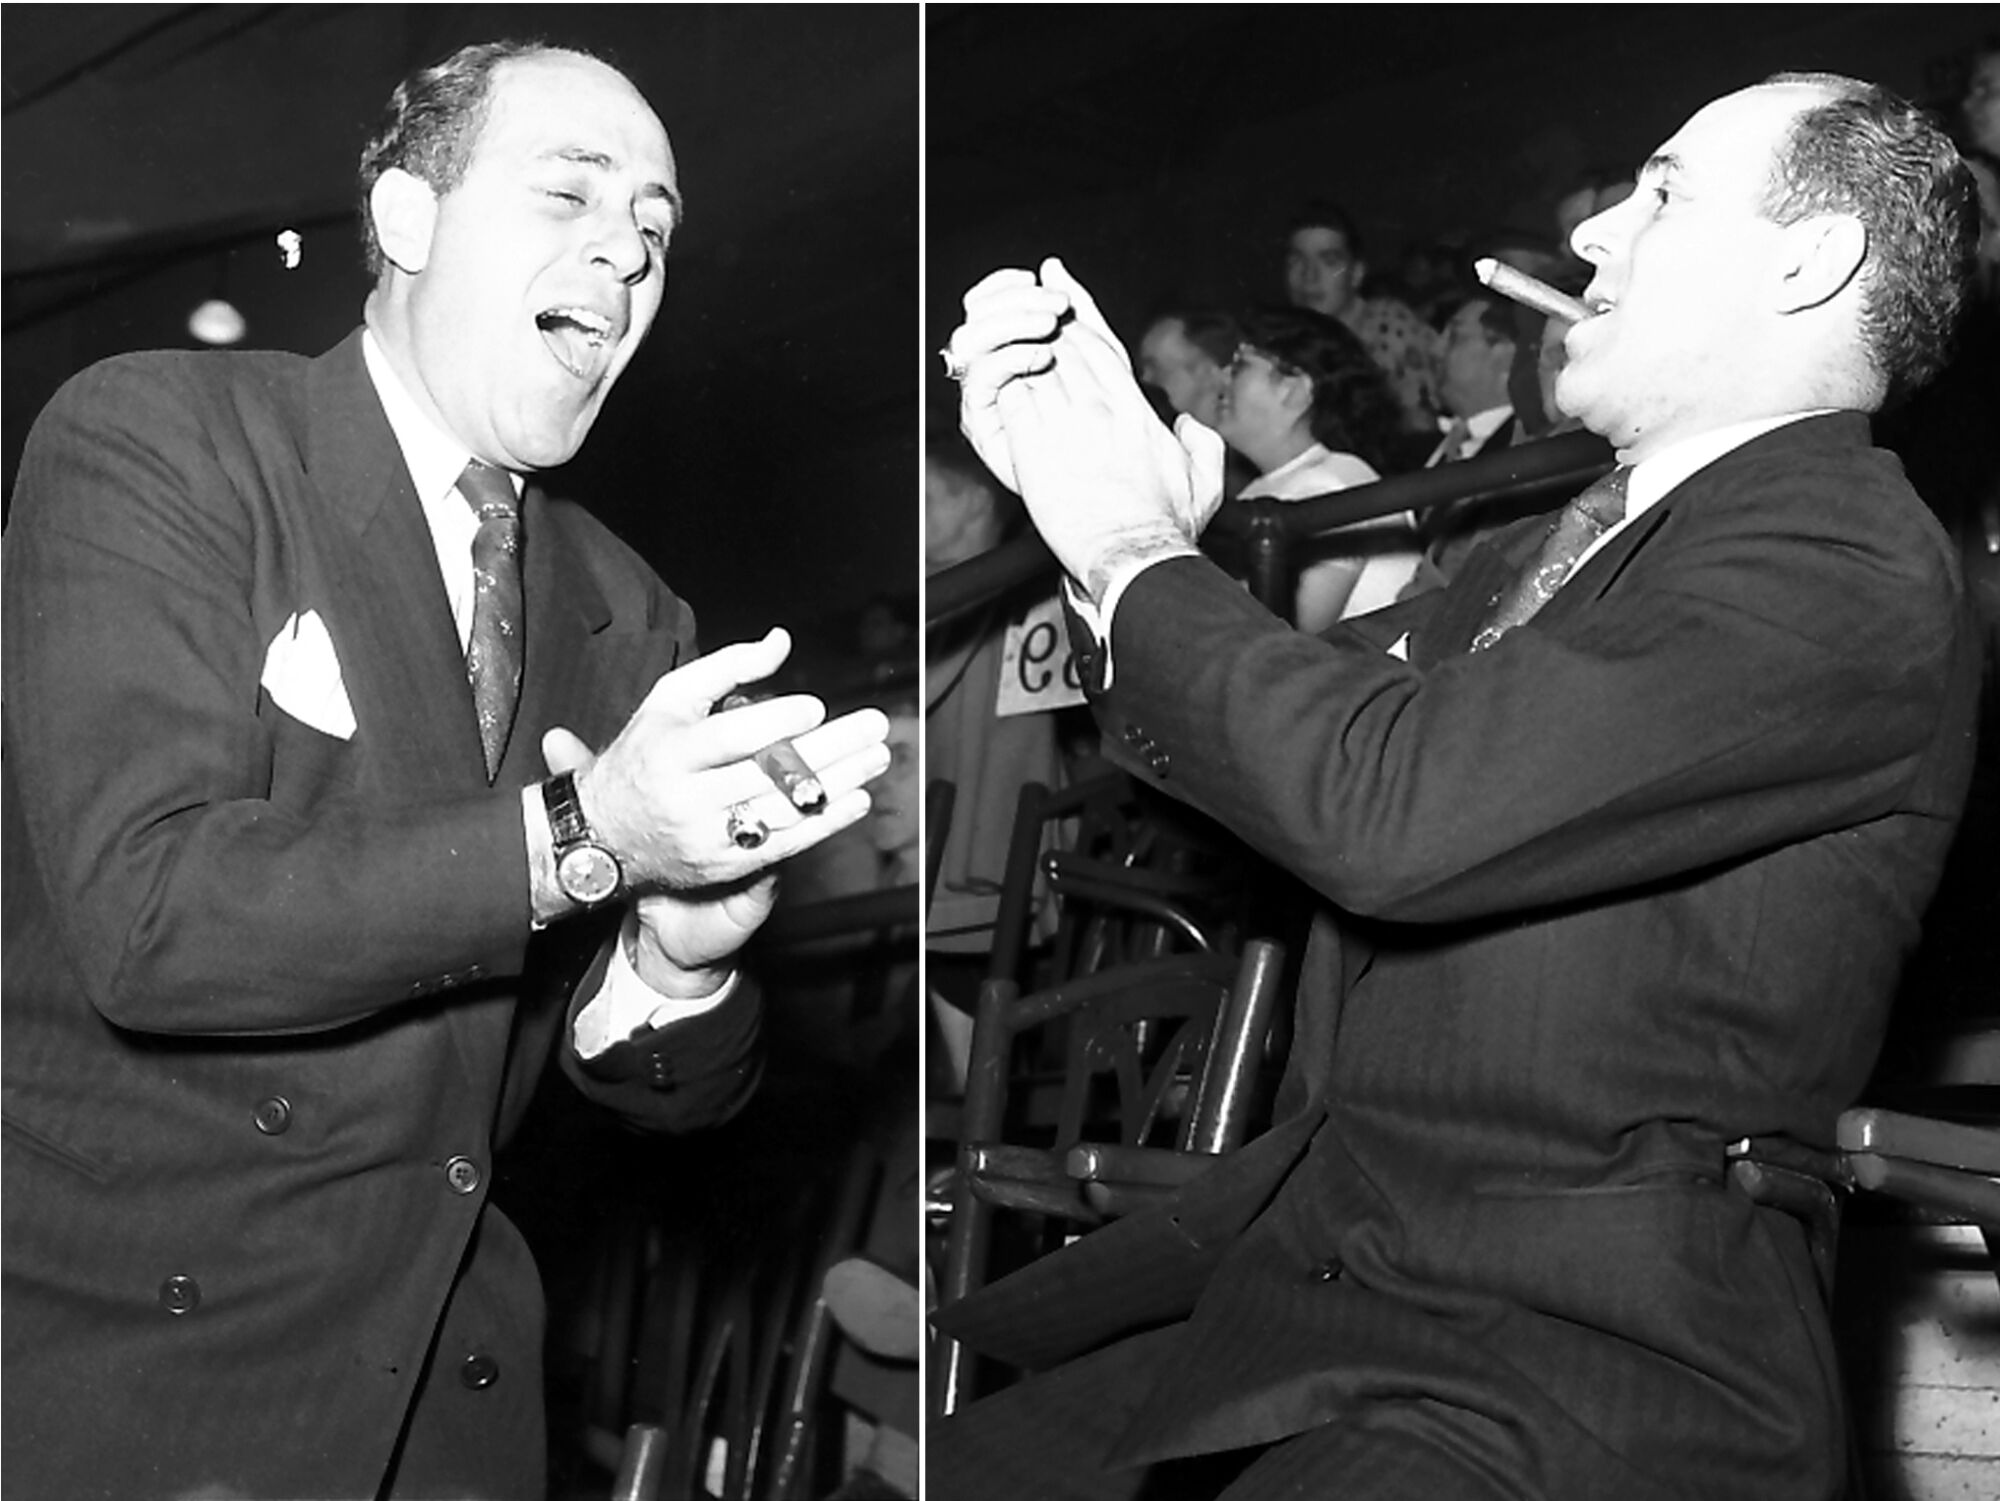 Two photos of Boston Celtics coach Red Auerbach clapping in 1951